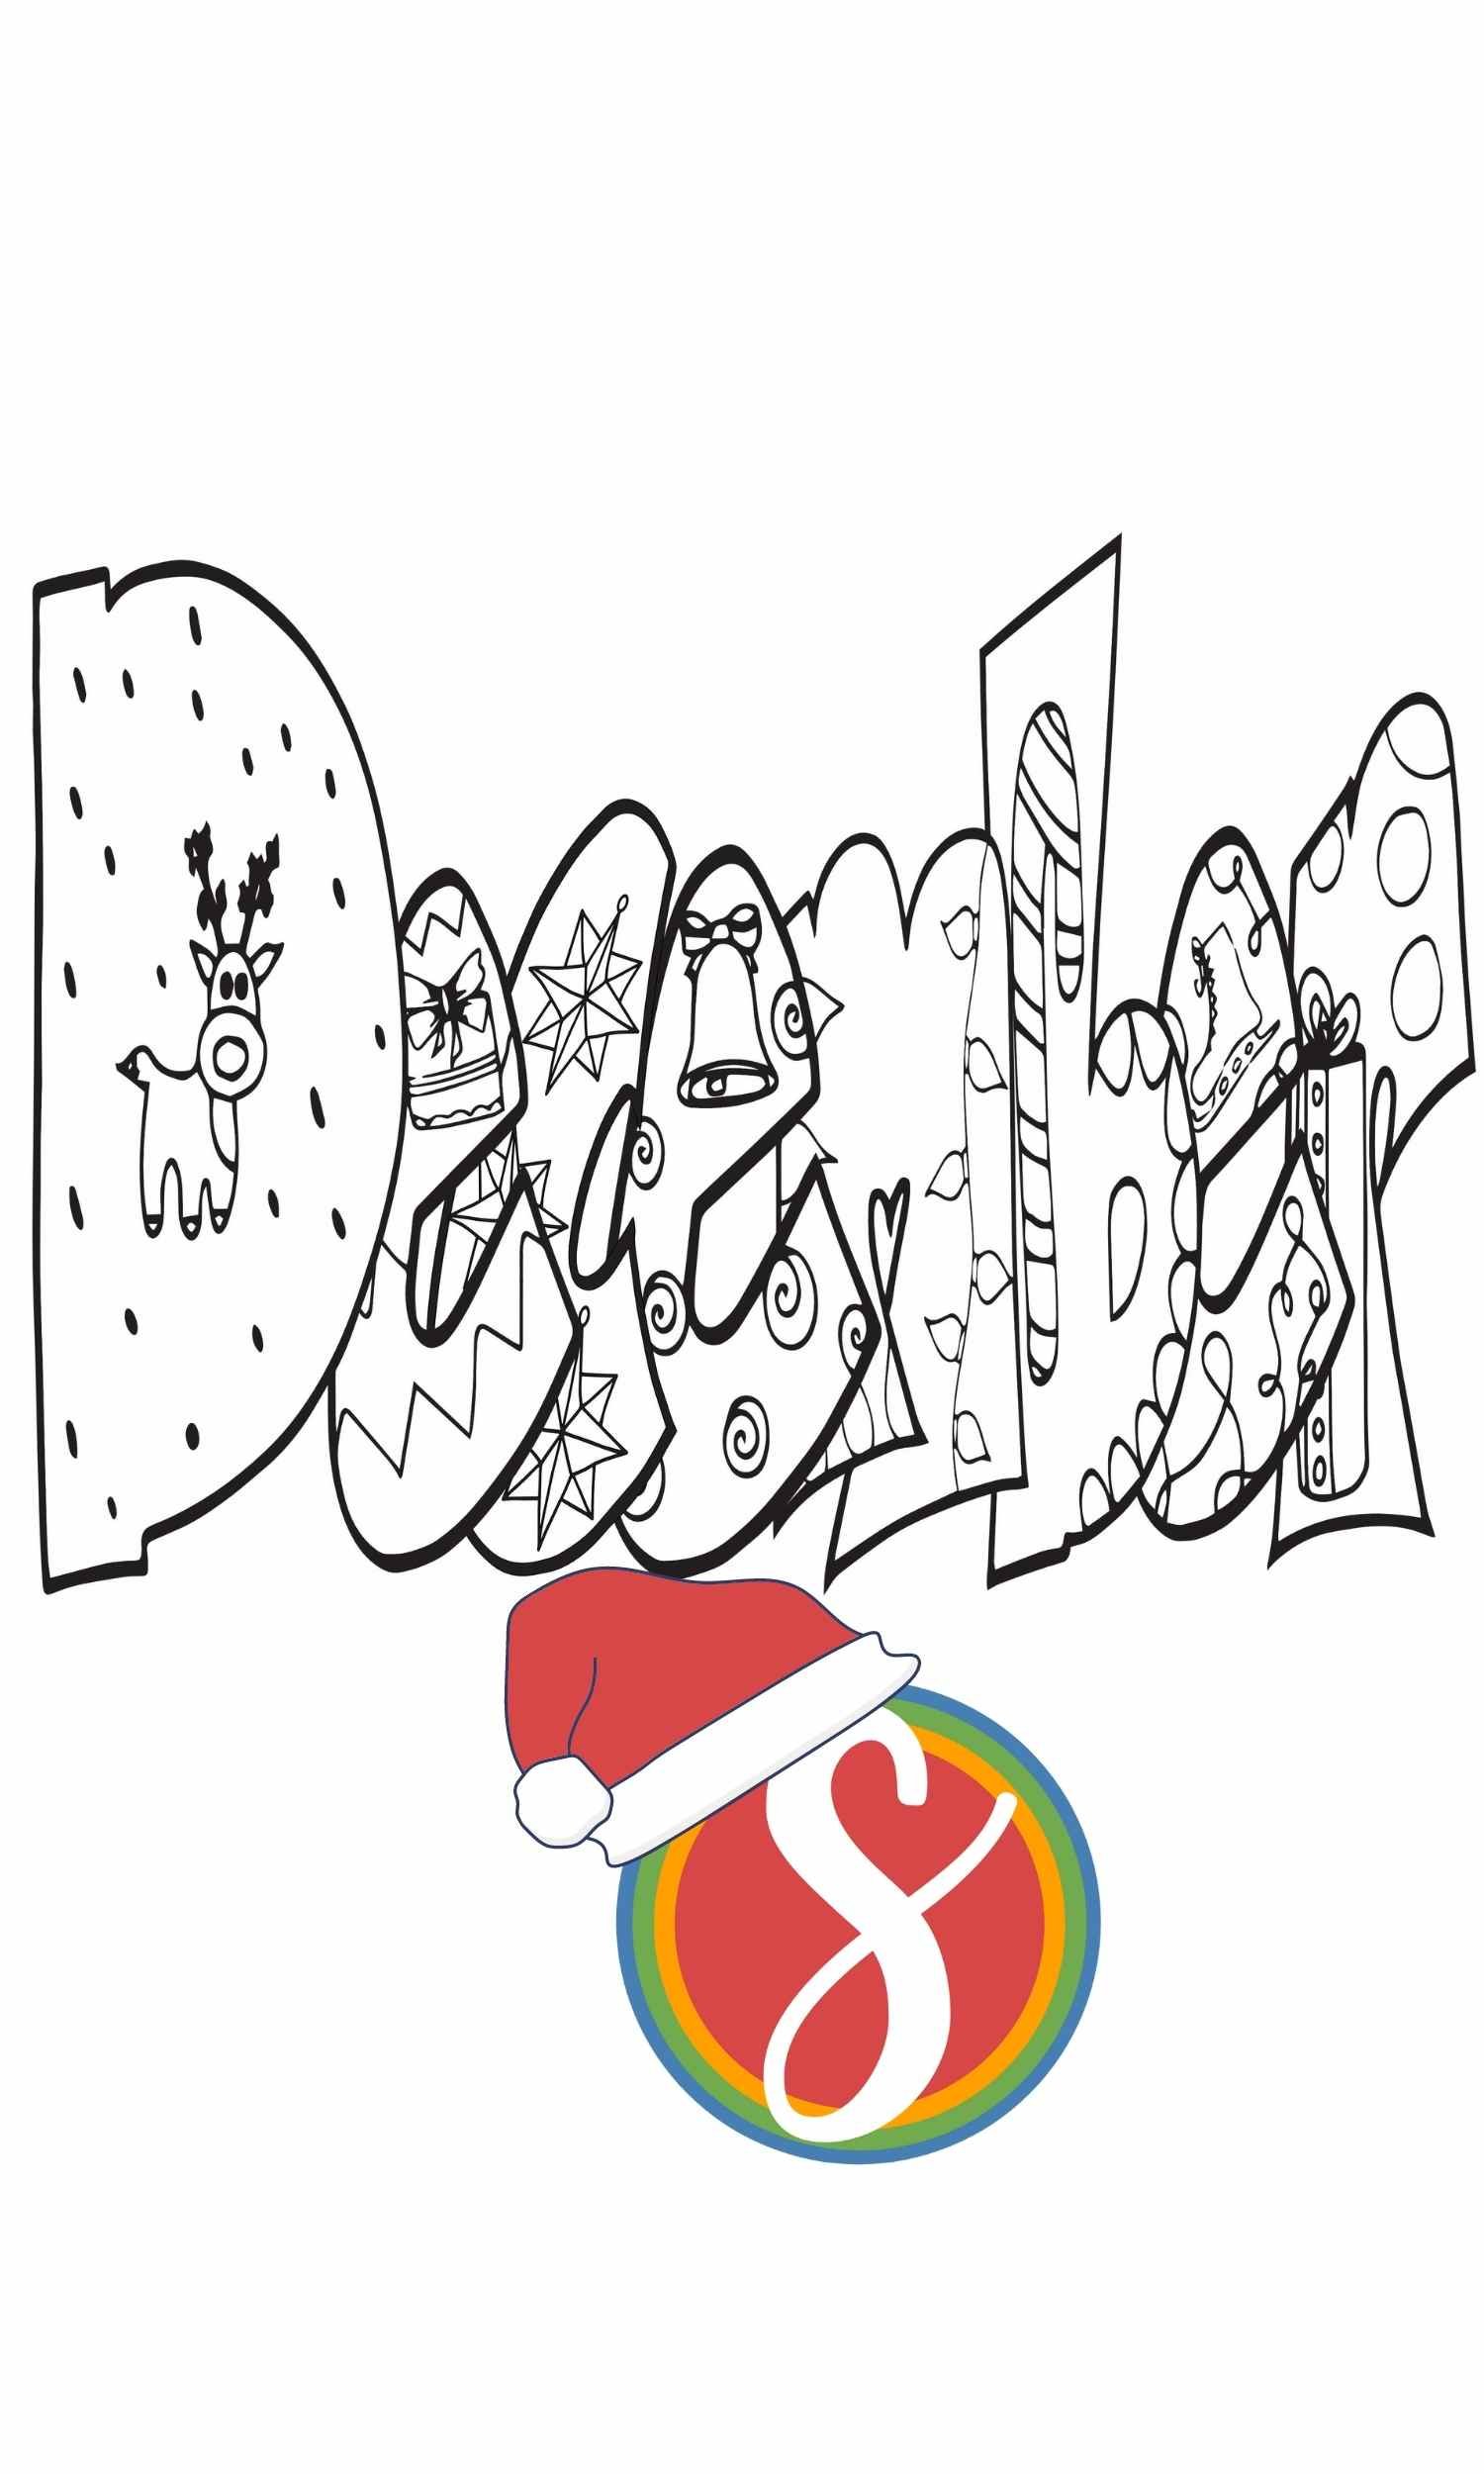 bubble letters "December" with christmas doodles inside to color